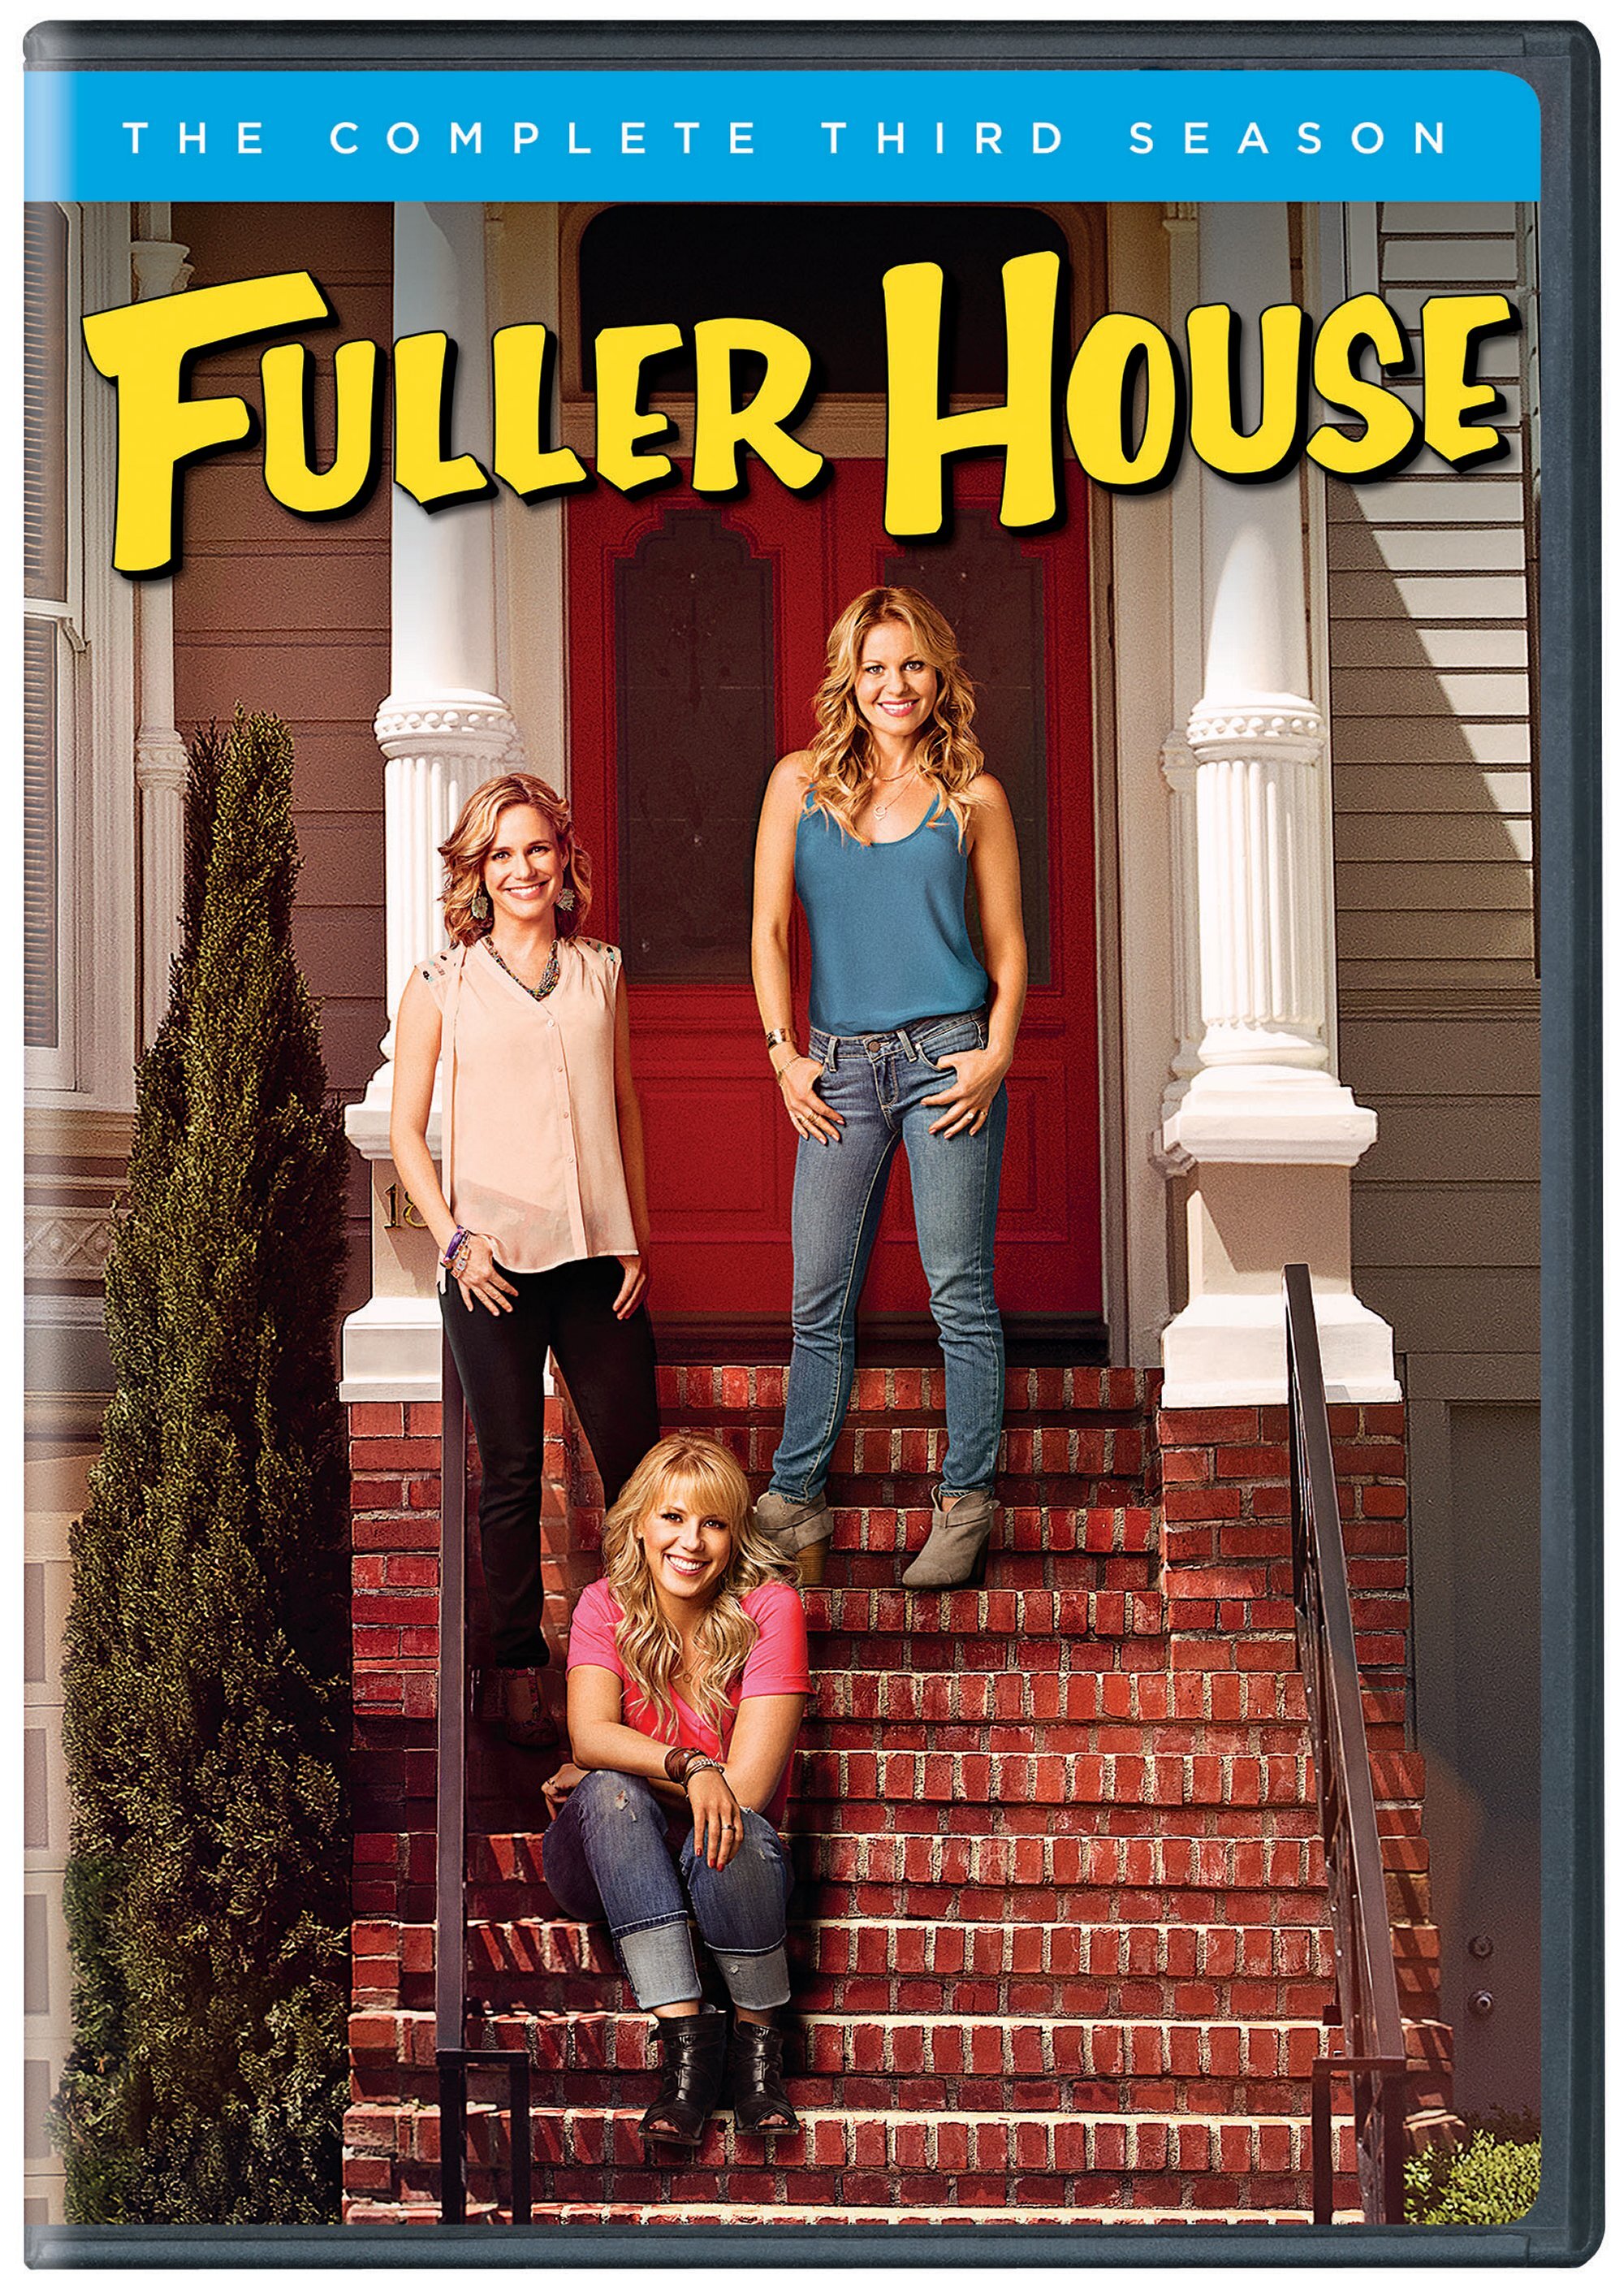 Fuller House: Season 3 - DVD [ 2017 ]  - Comedy Television On DVD - TV Shows On GRUV